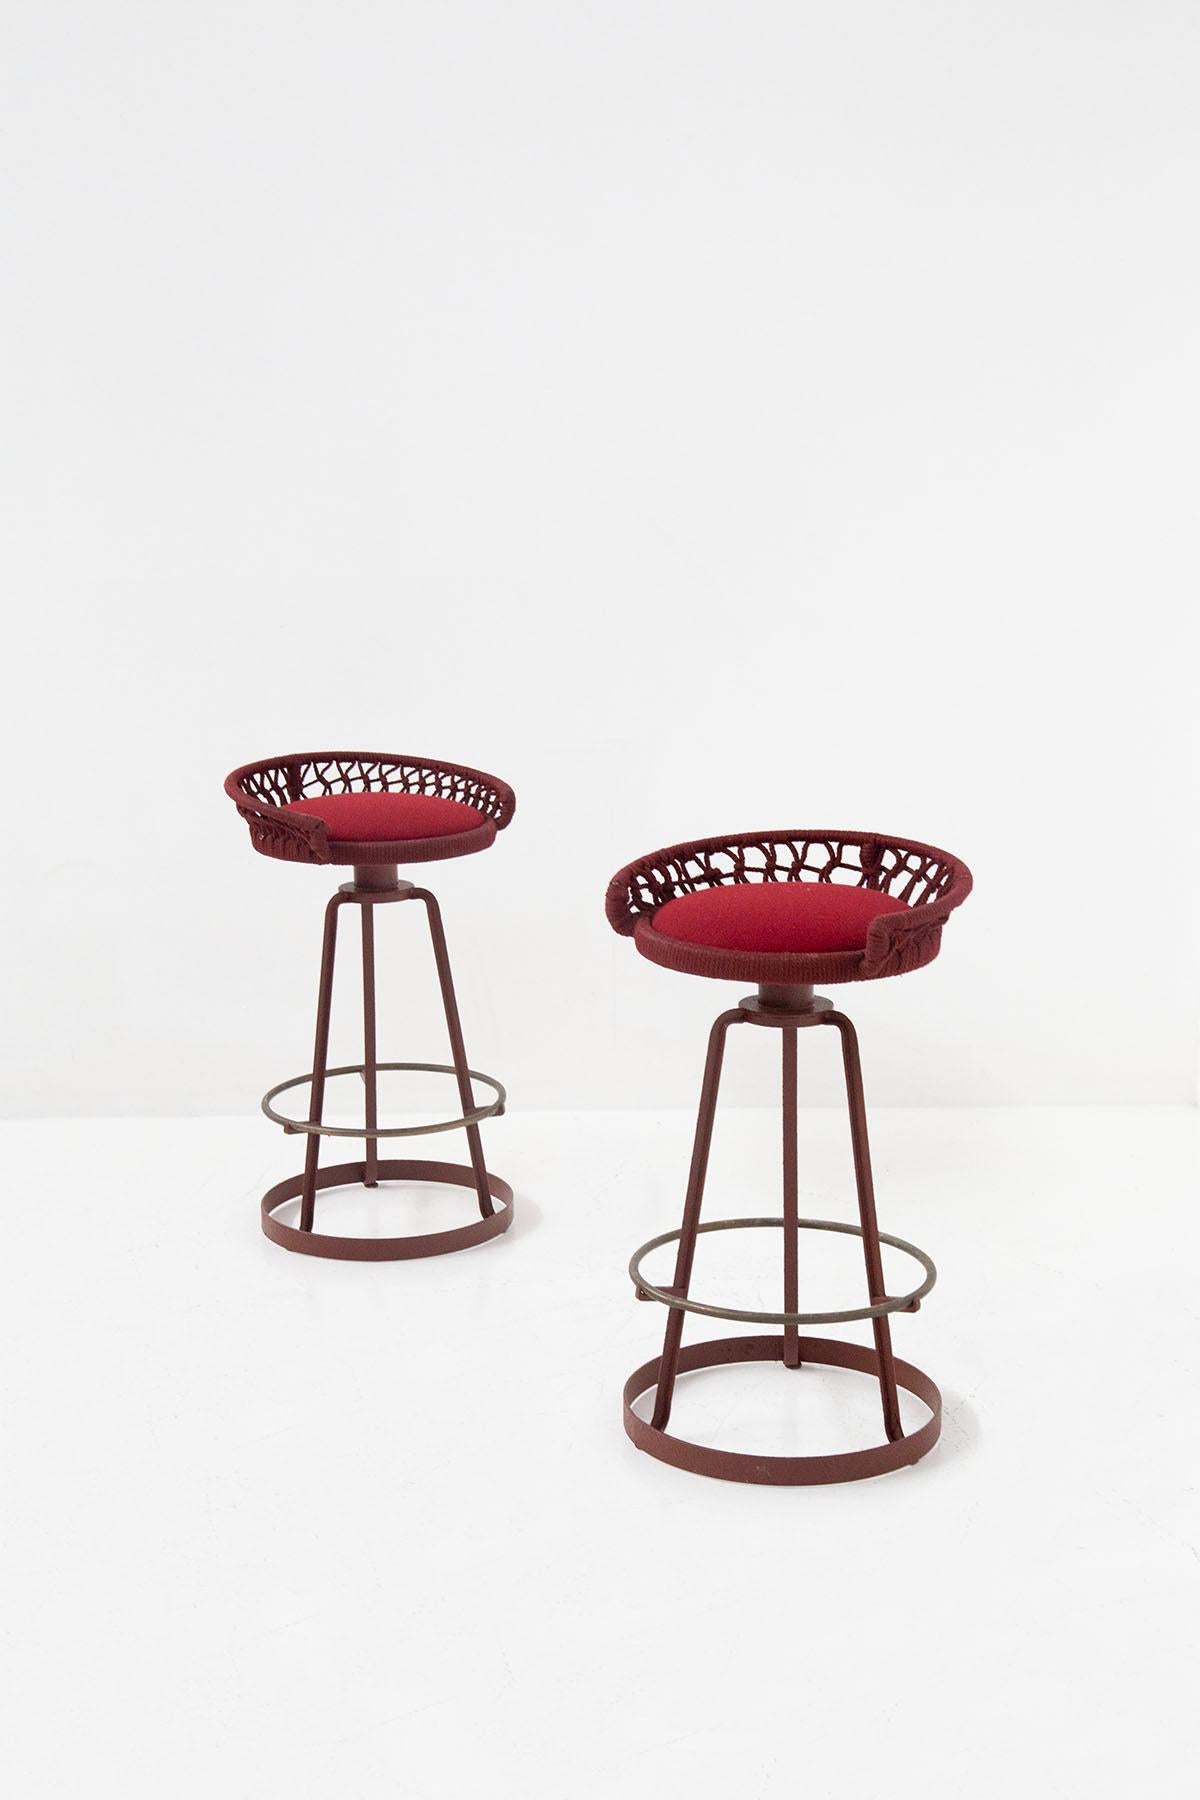 Fascinating pair of high stools designed by the great Italian 1970s designer Marzio Cecchi. The pair of stools through its gear is also swivel. Their great peculiarity is the seat made of red rope that wraps around the iron structure underneath. The